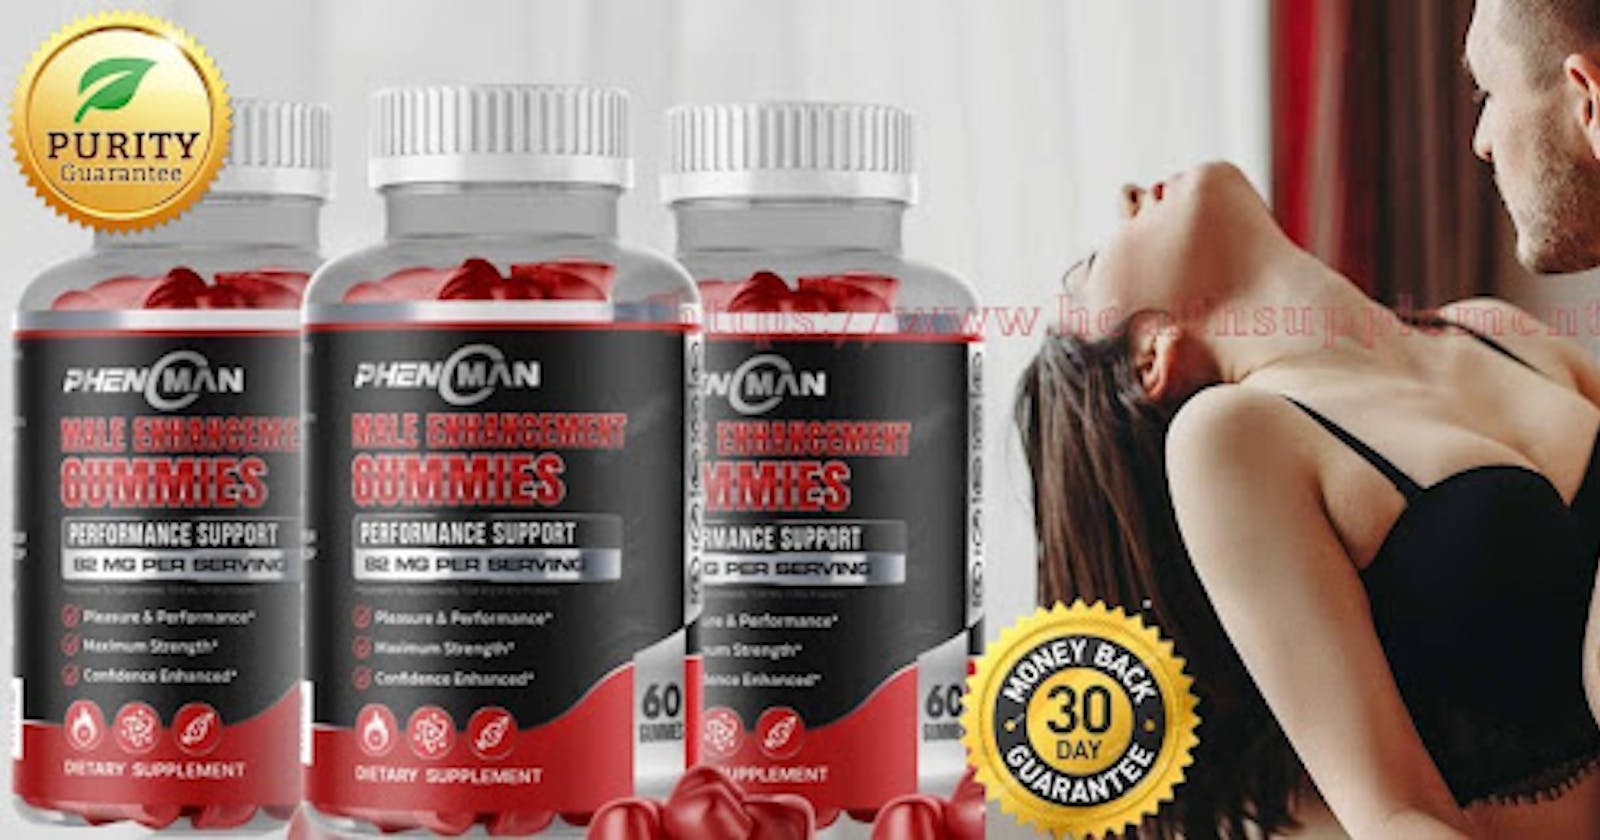 Phenoman Male Enhancement Uk Reviews: All You Need To Know About !